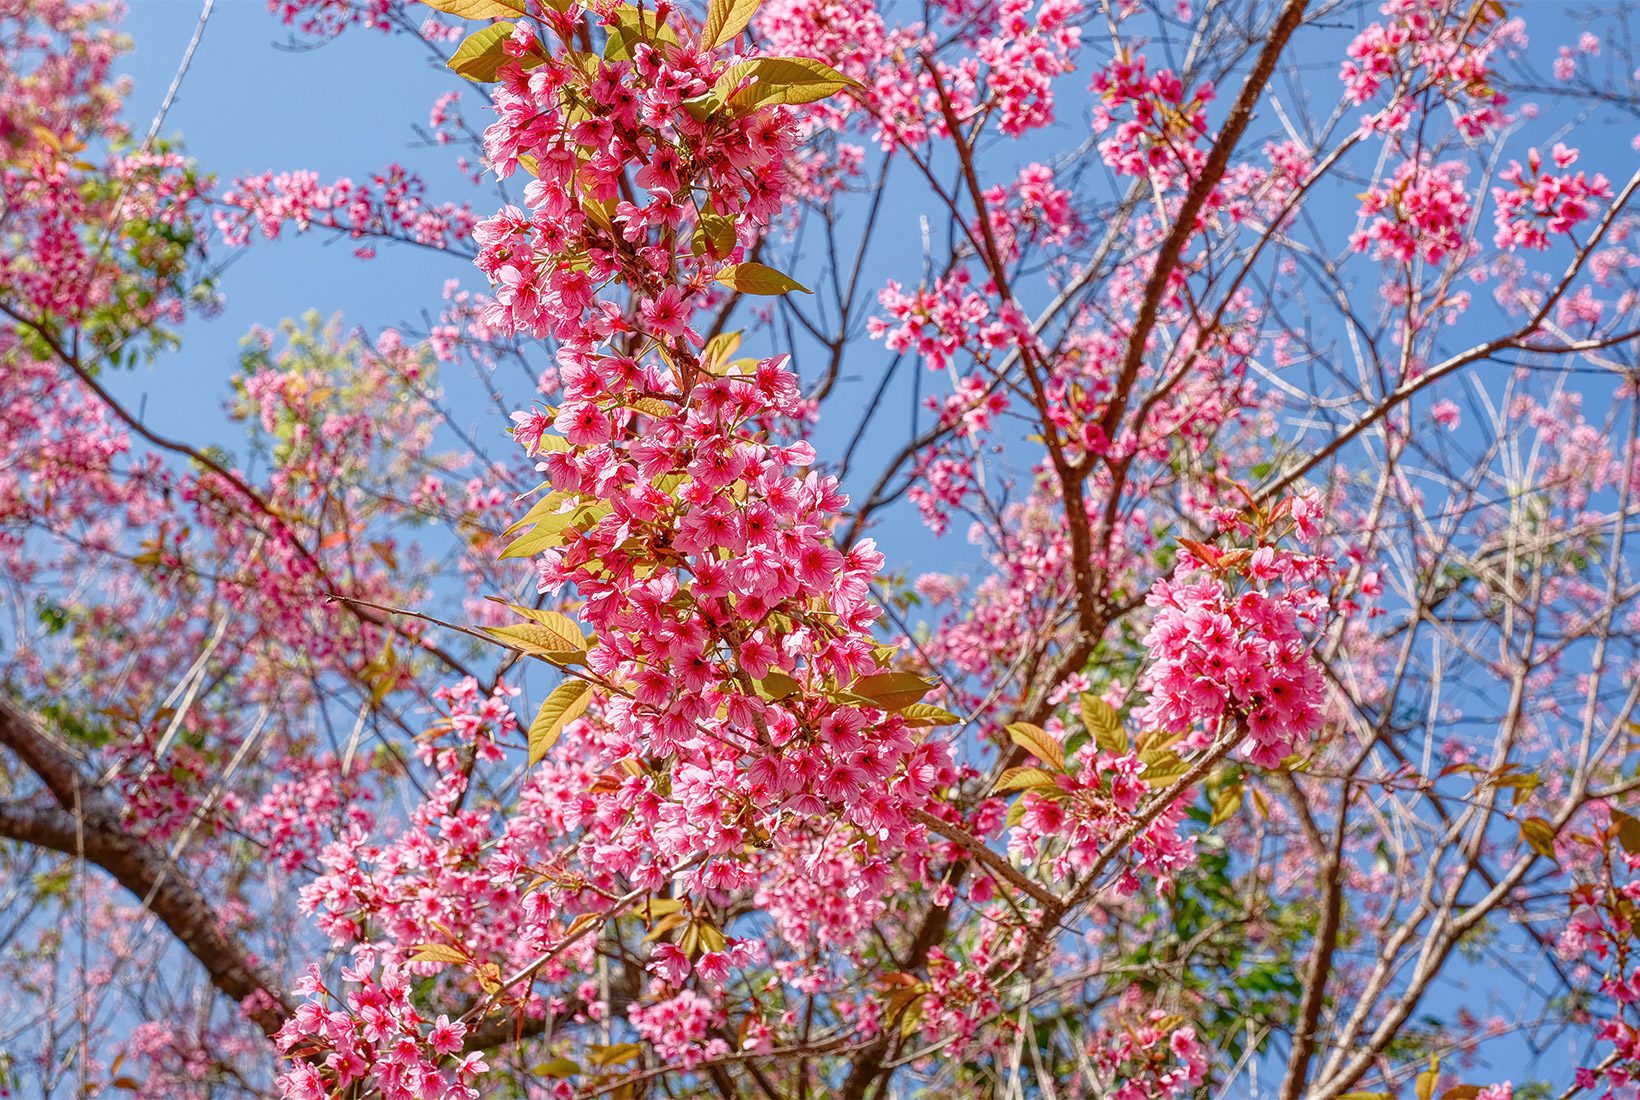 Branches of the Wild Himalayan Cherry trees are heavy with cherry tree blossoms in December and January